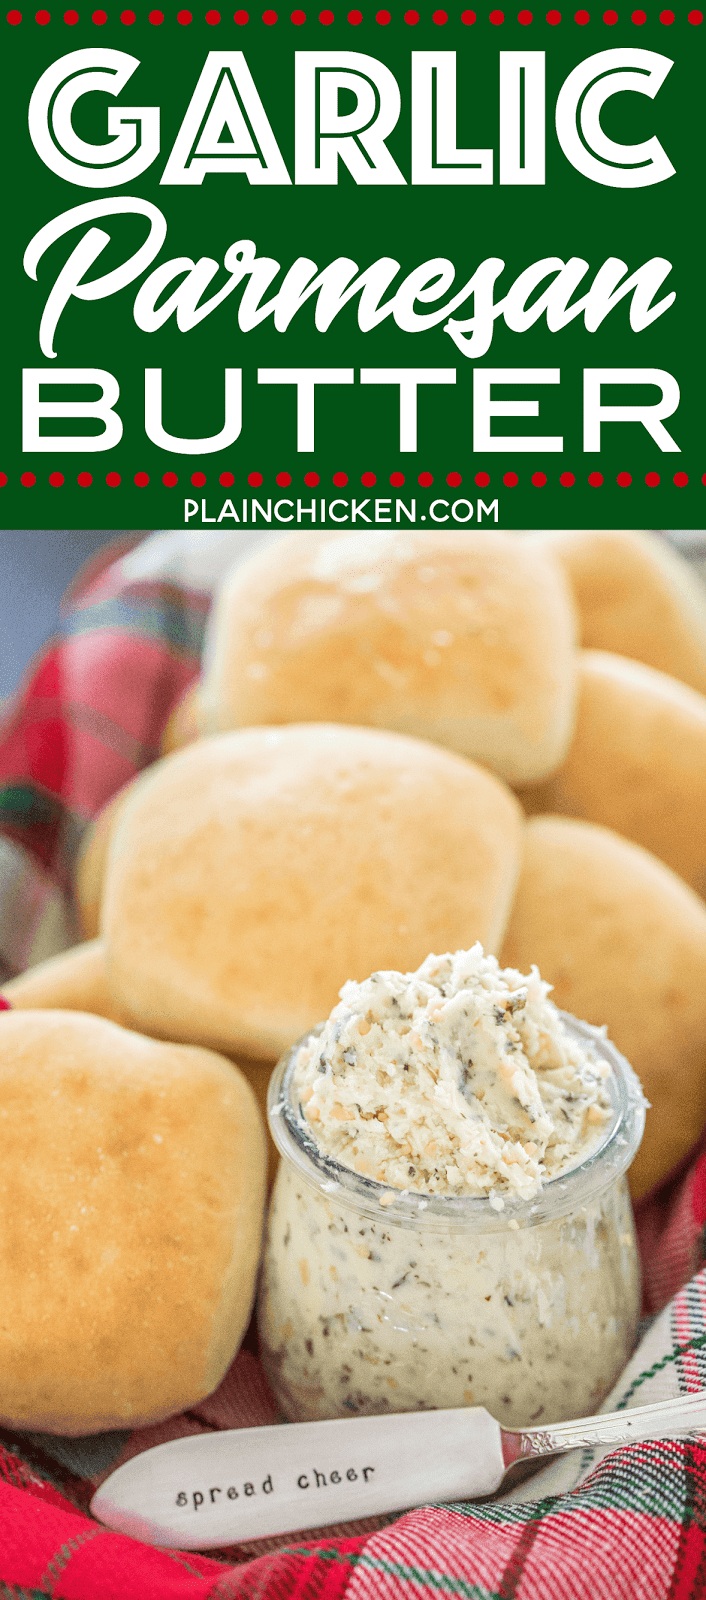 Garlic Parmesan Butter - only 6 ingredients. Butter, garlic, parsley, Italian seasoning, pepper and parmesan cheese. Perfect accompaniment to Sister Schubert's Dinner Yeast Rolls. Whip up a batch of butter while the rolls bake! Also makes a great homemade gift! #butter #garlic #garlicbutter #sisterschuberts